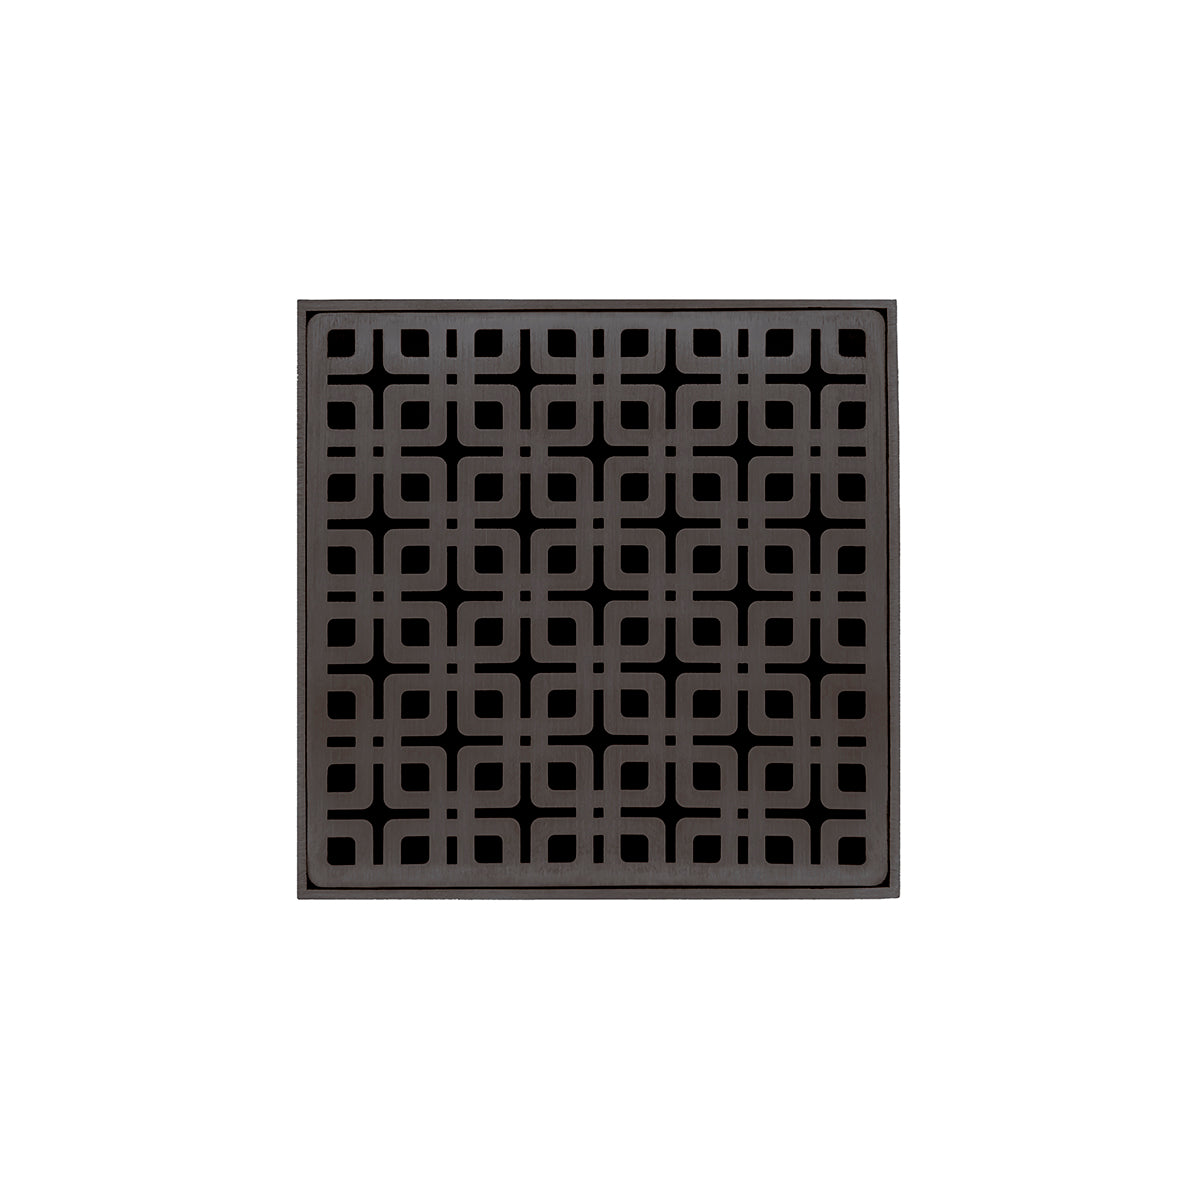 Infinity Drain 5" x 5" KDB 5 Premium Center Drain Kit with Link Pattern Decorative Plate with ABS Bonded Flange Drain Body, 2", 3" and 4" Outlet